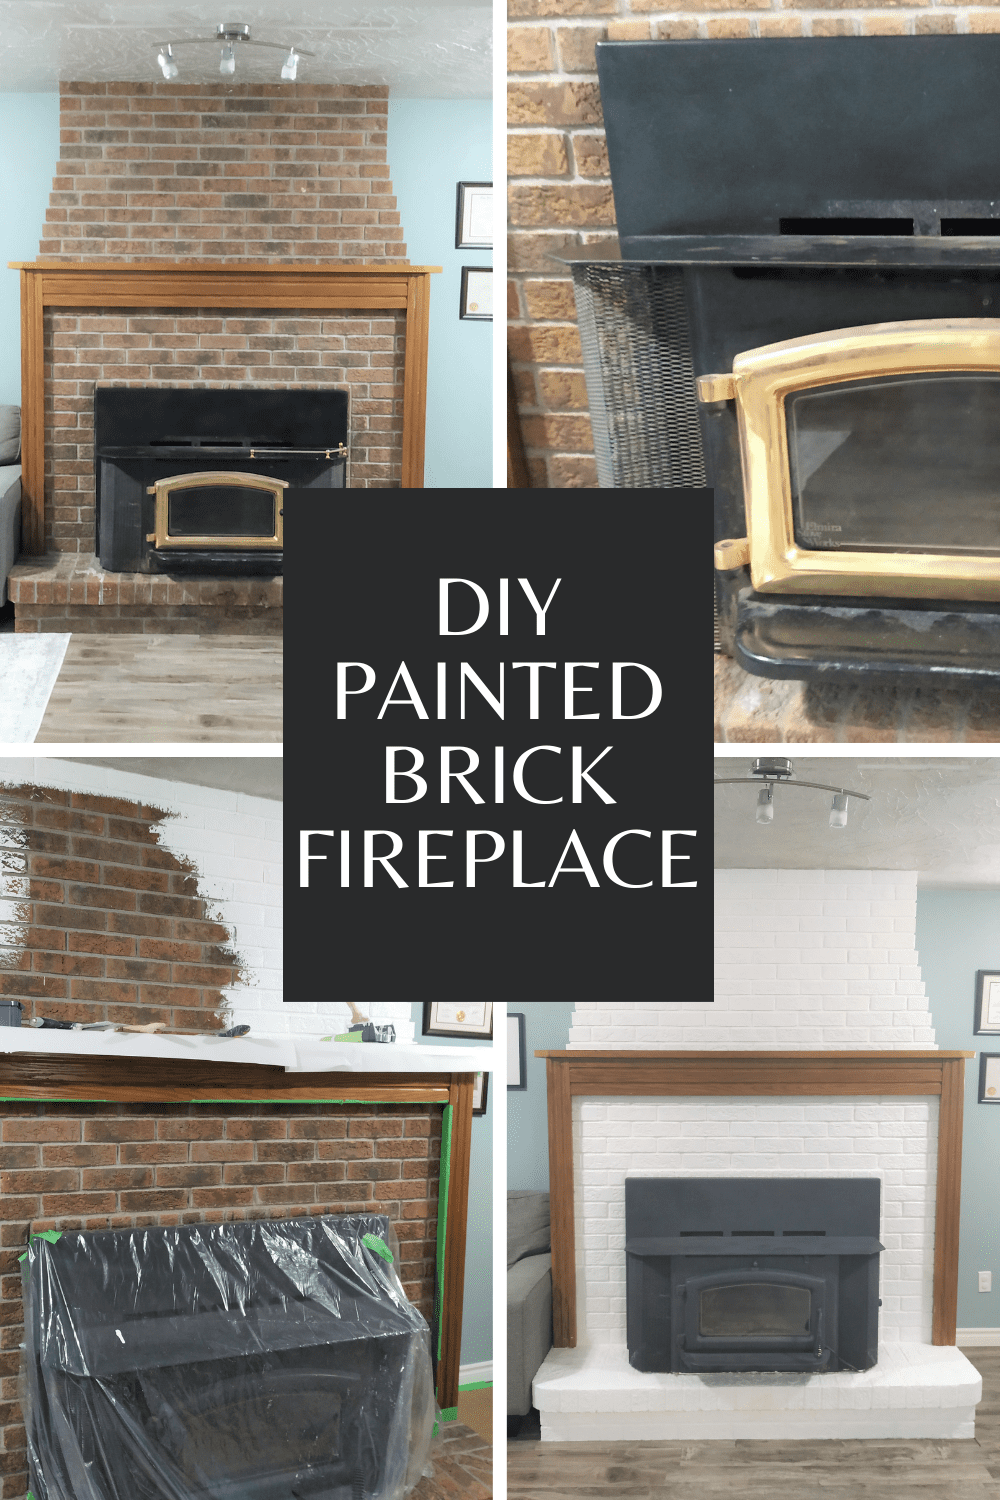 Collage of brick fireplace makeover process with text overlay.